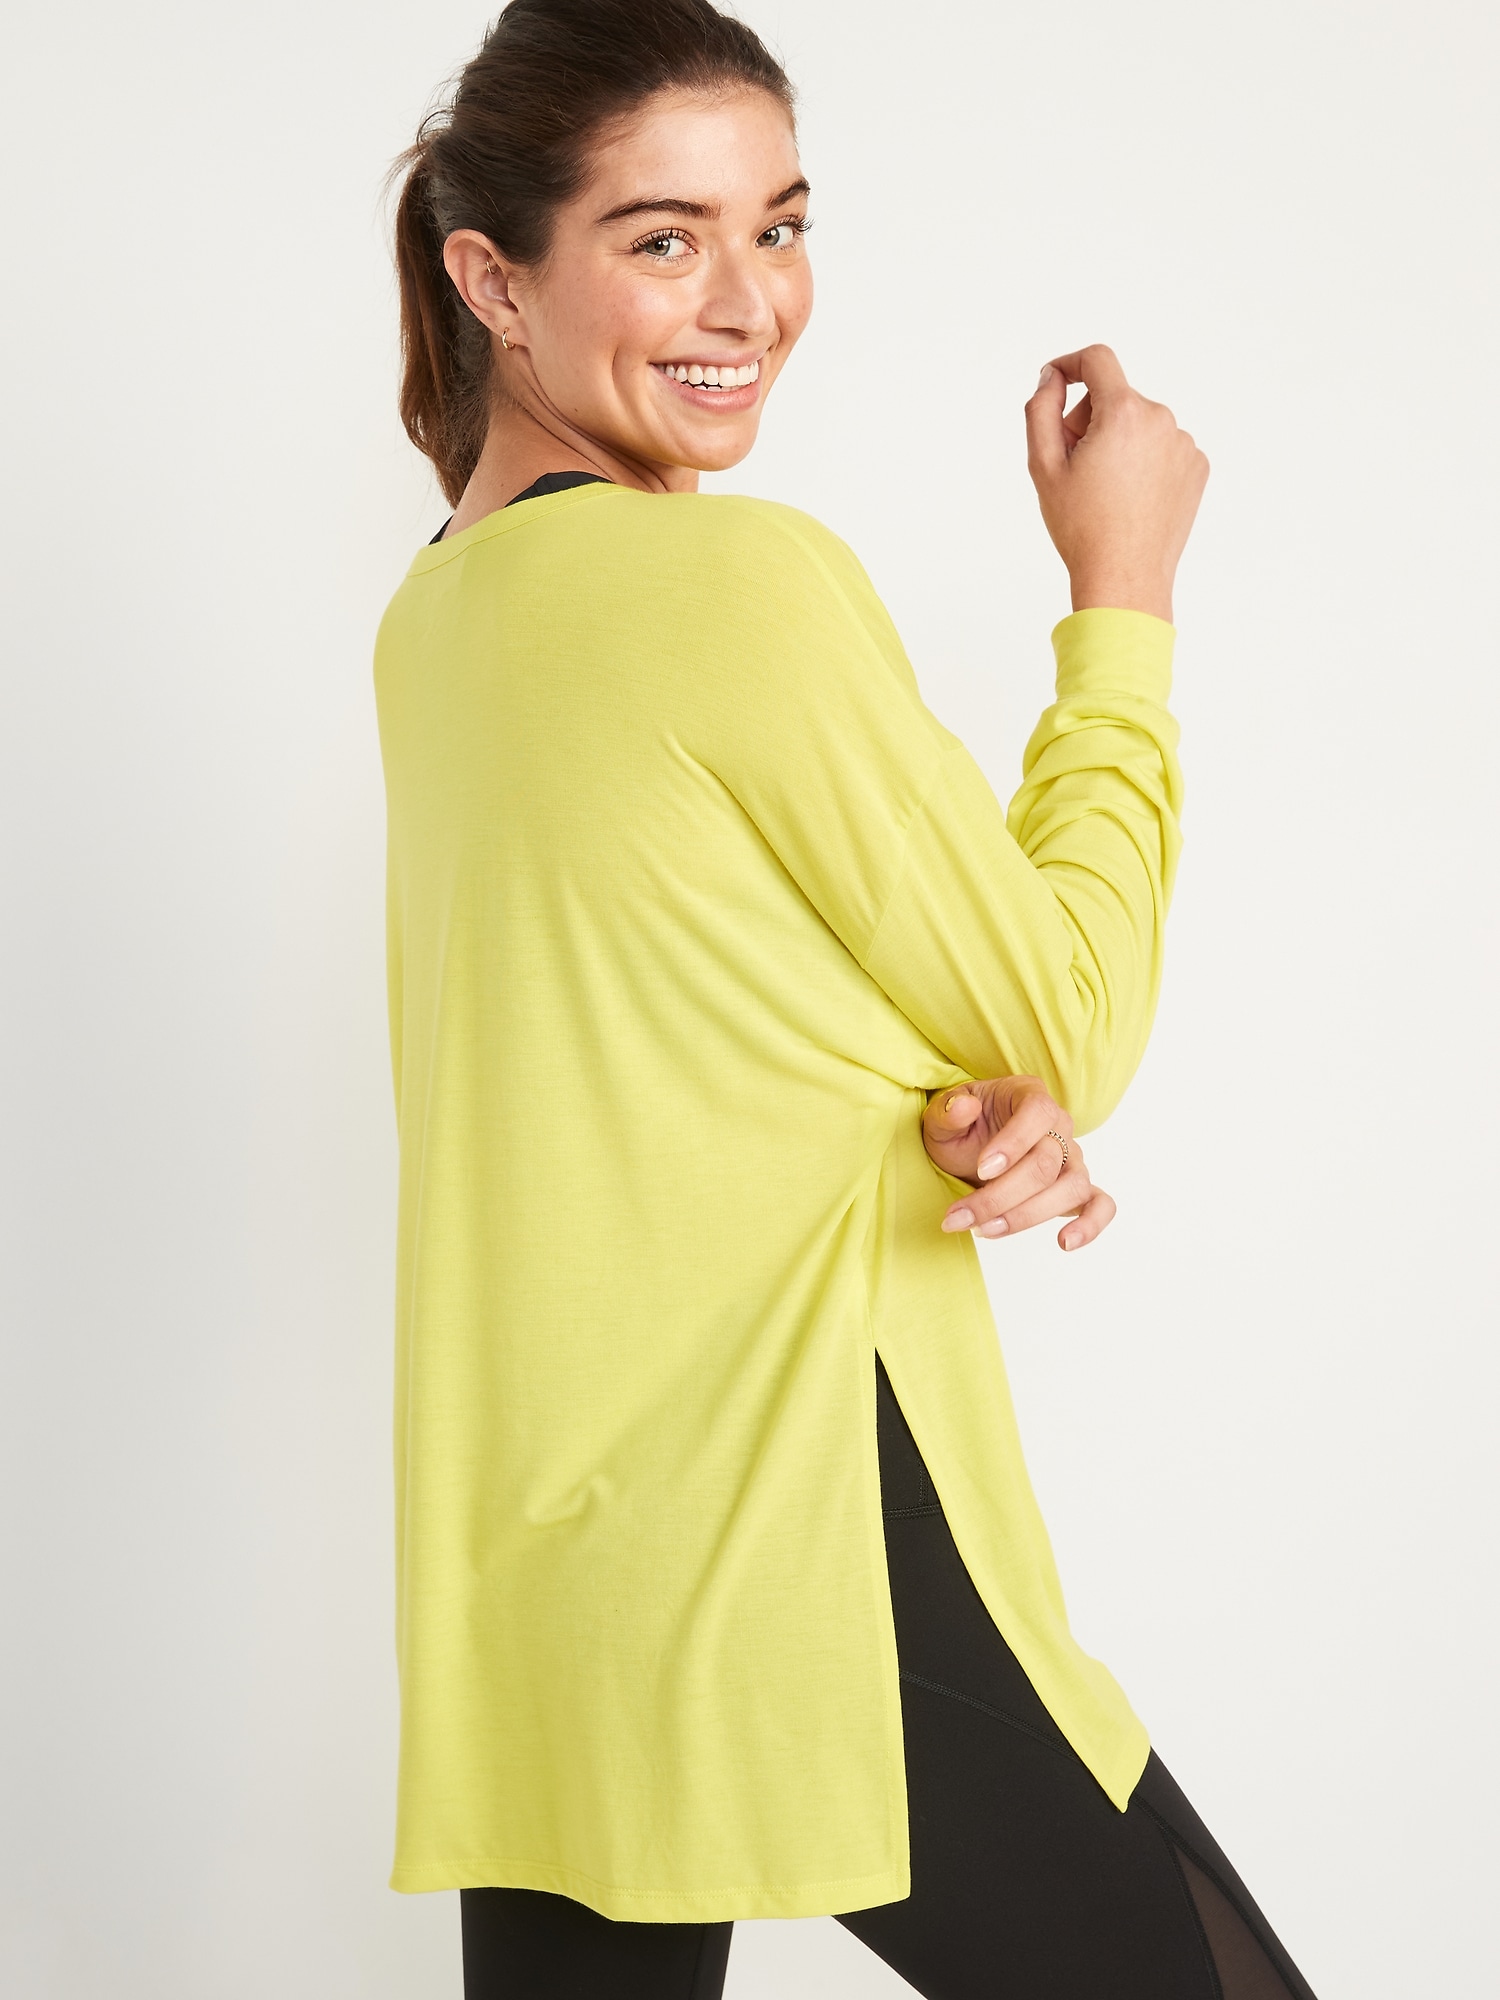 Long-Sleeve UltraLite All-Day Performance Tunic T-Shirt